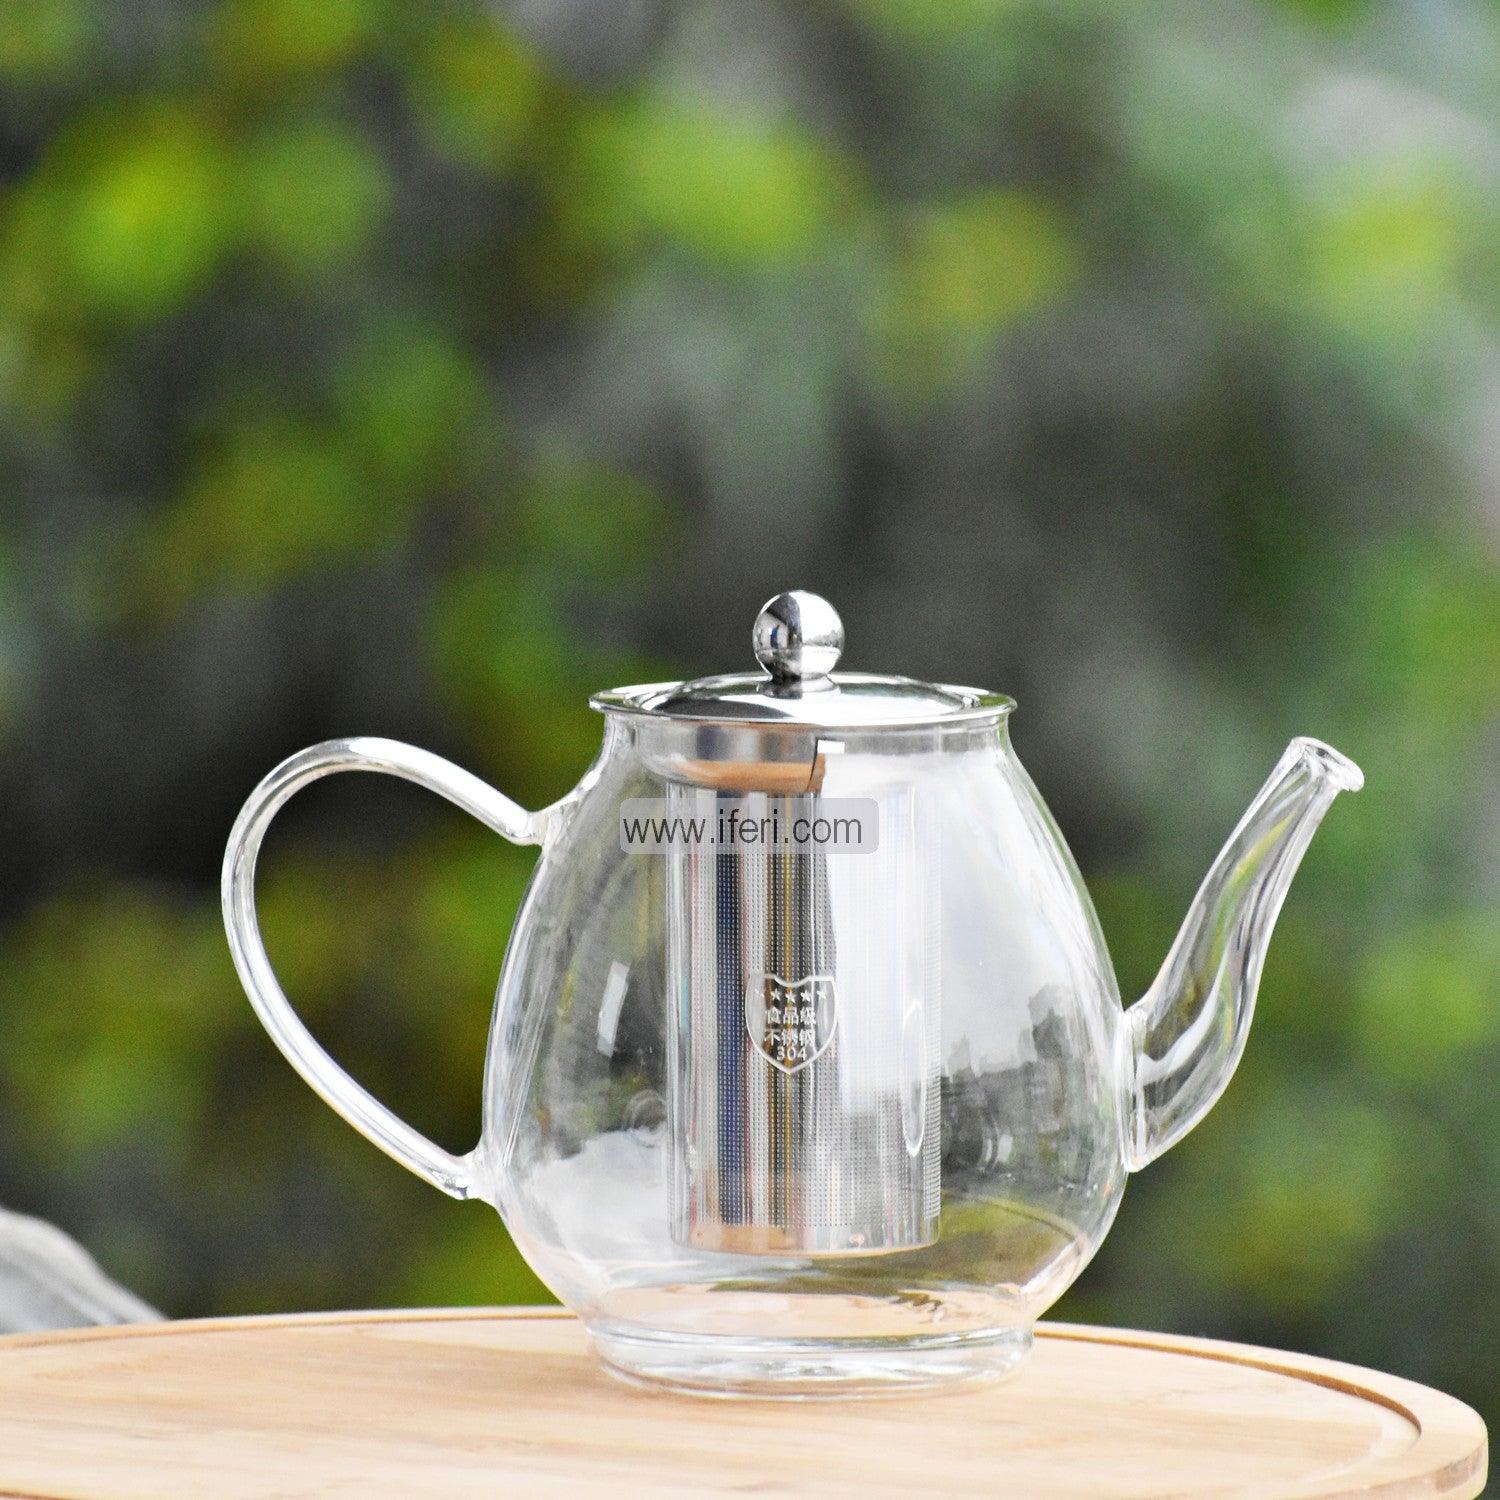 5.5 Inch Tempered Glass Tea Pot with Infuser RY0140 Price in Bangladesh - iferi.com